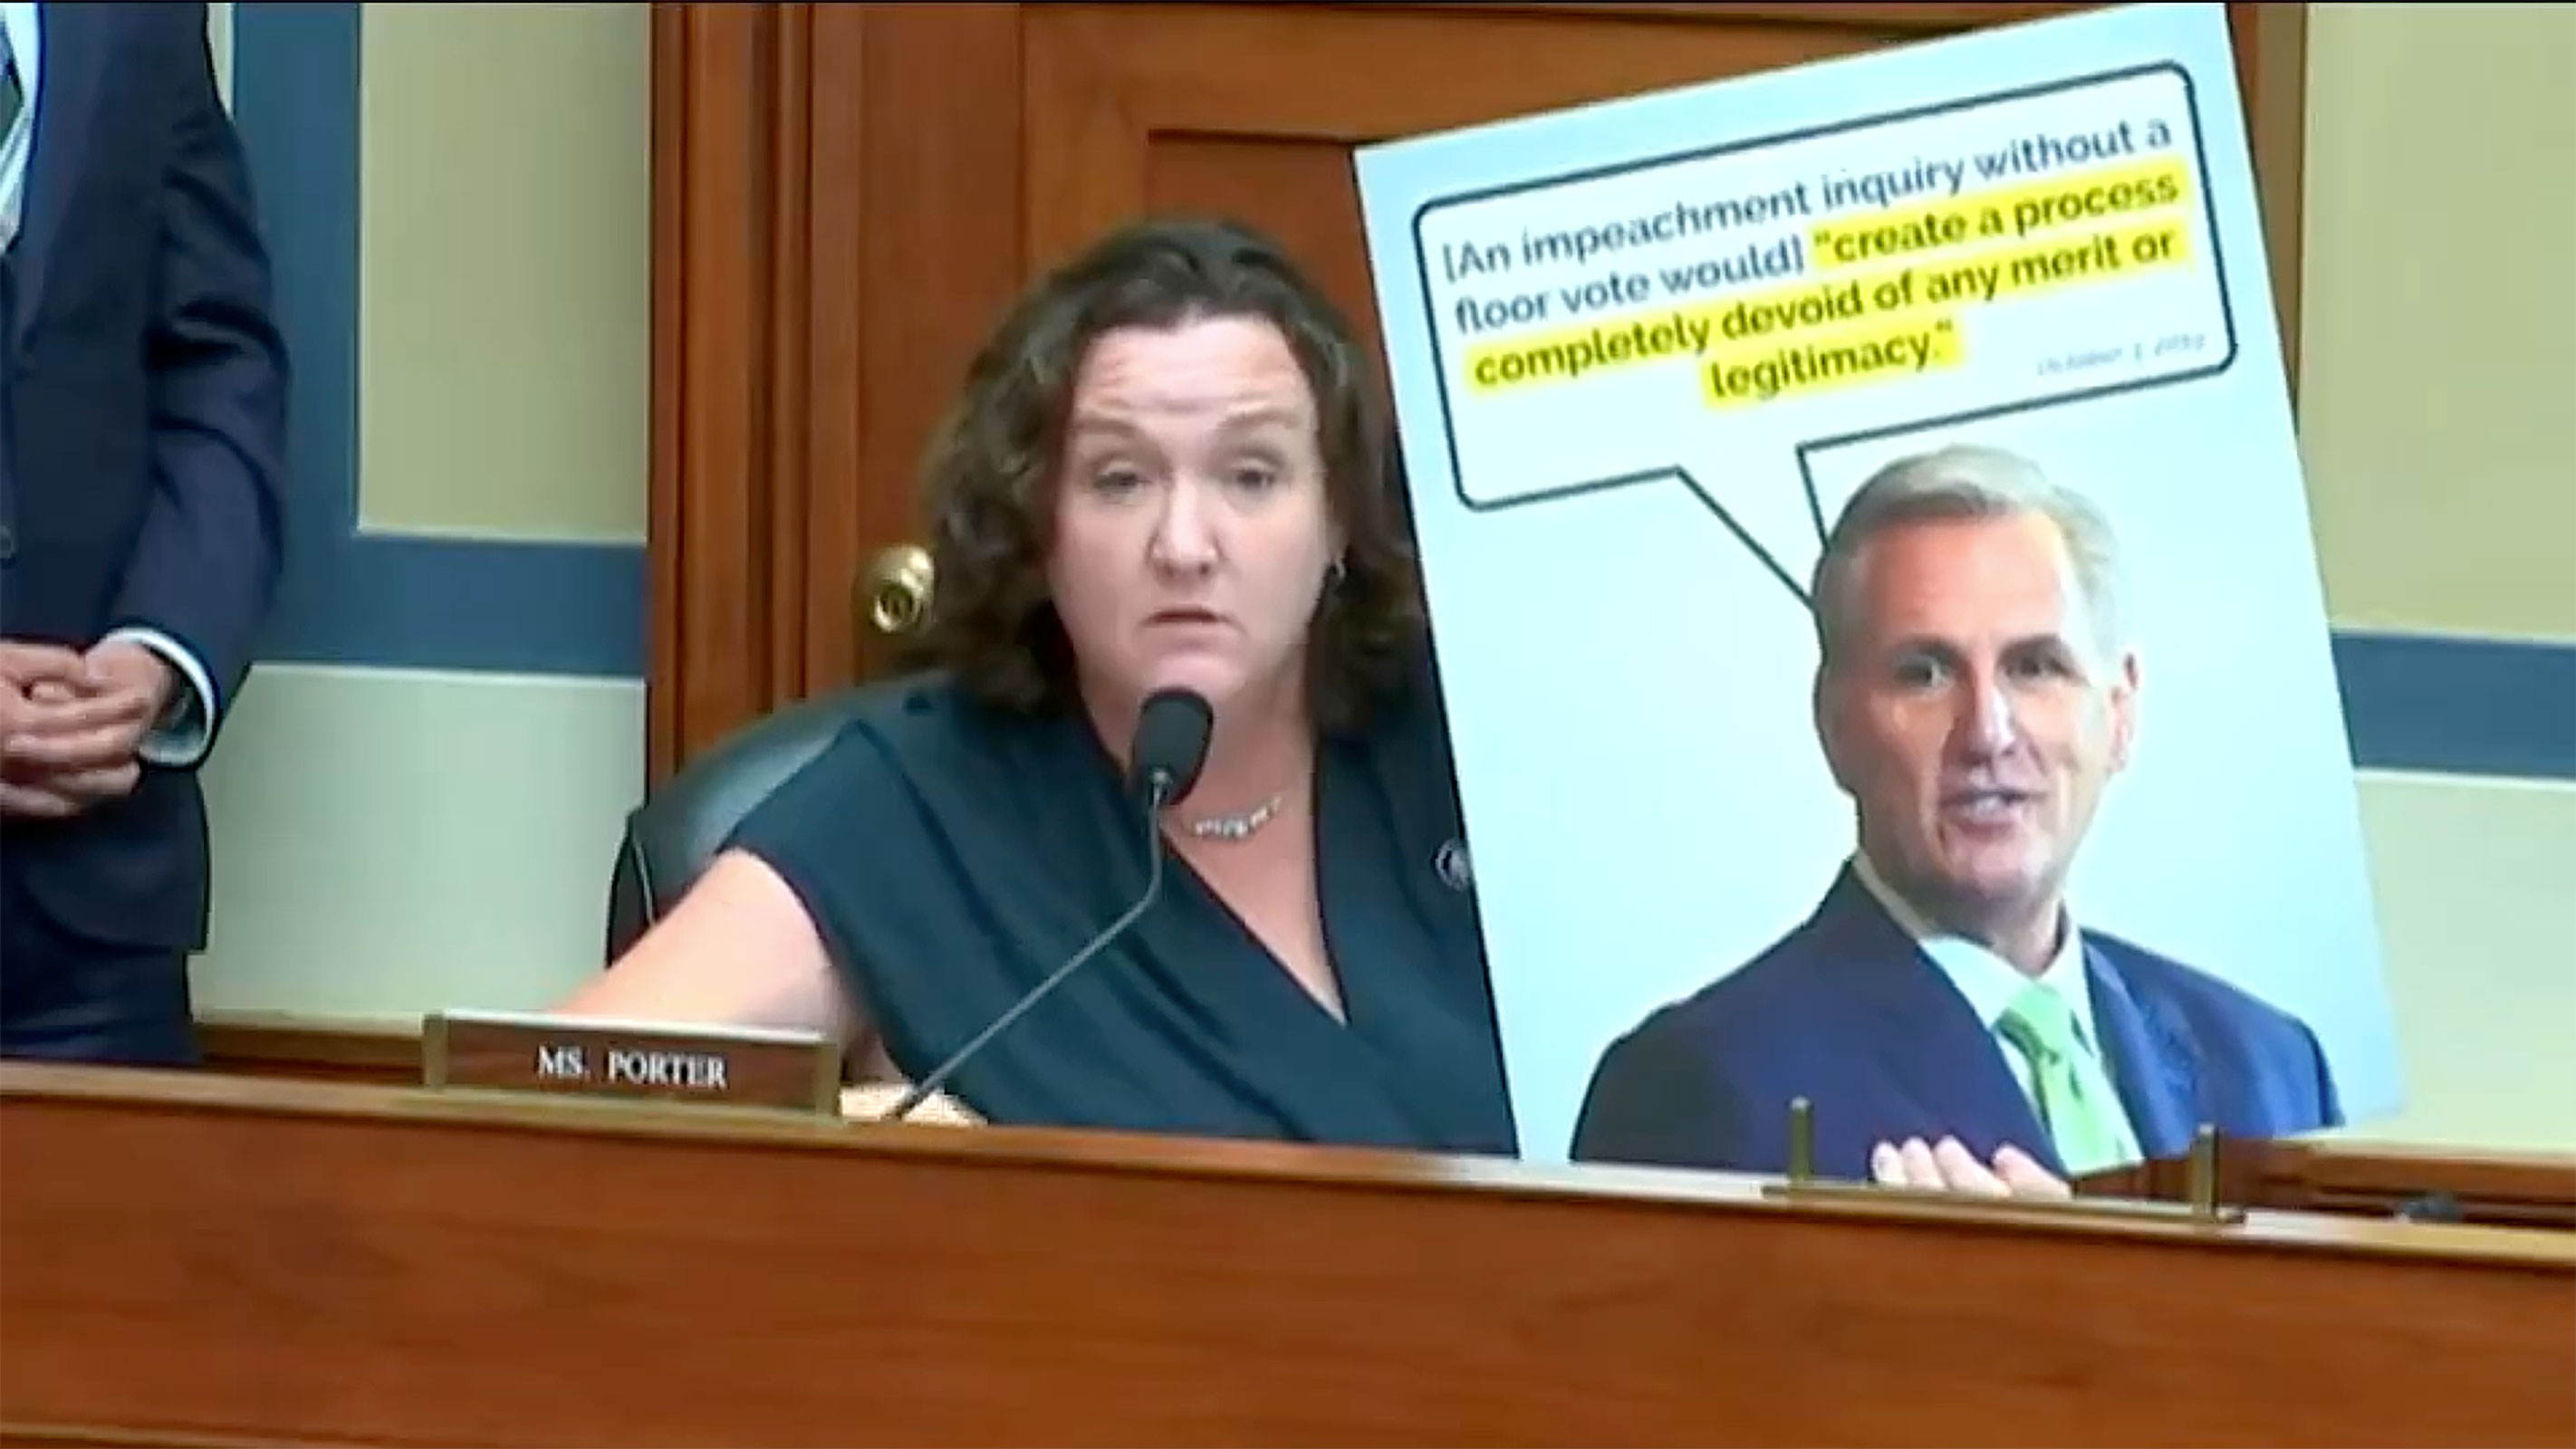 Rep. Katie Porter holds up a poster board with a quote from Rep. Kevin McCarthy saying that an impeachment inquiry without a vote authorizing it would "create a process completely devoid of any merit or legitimacy." 